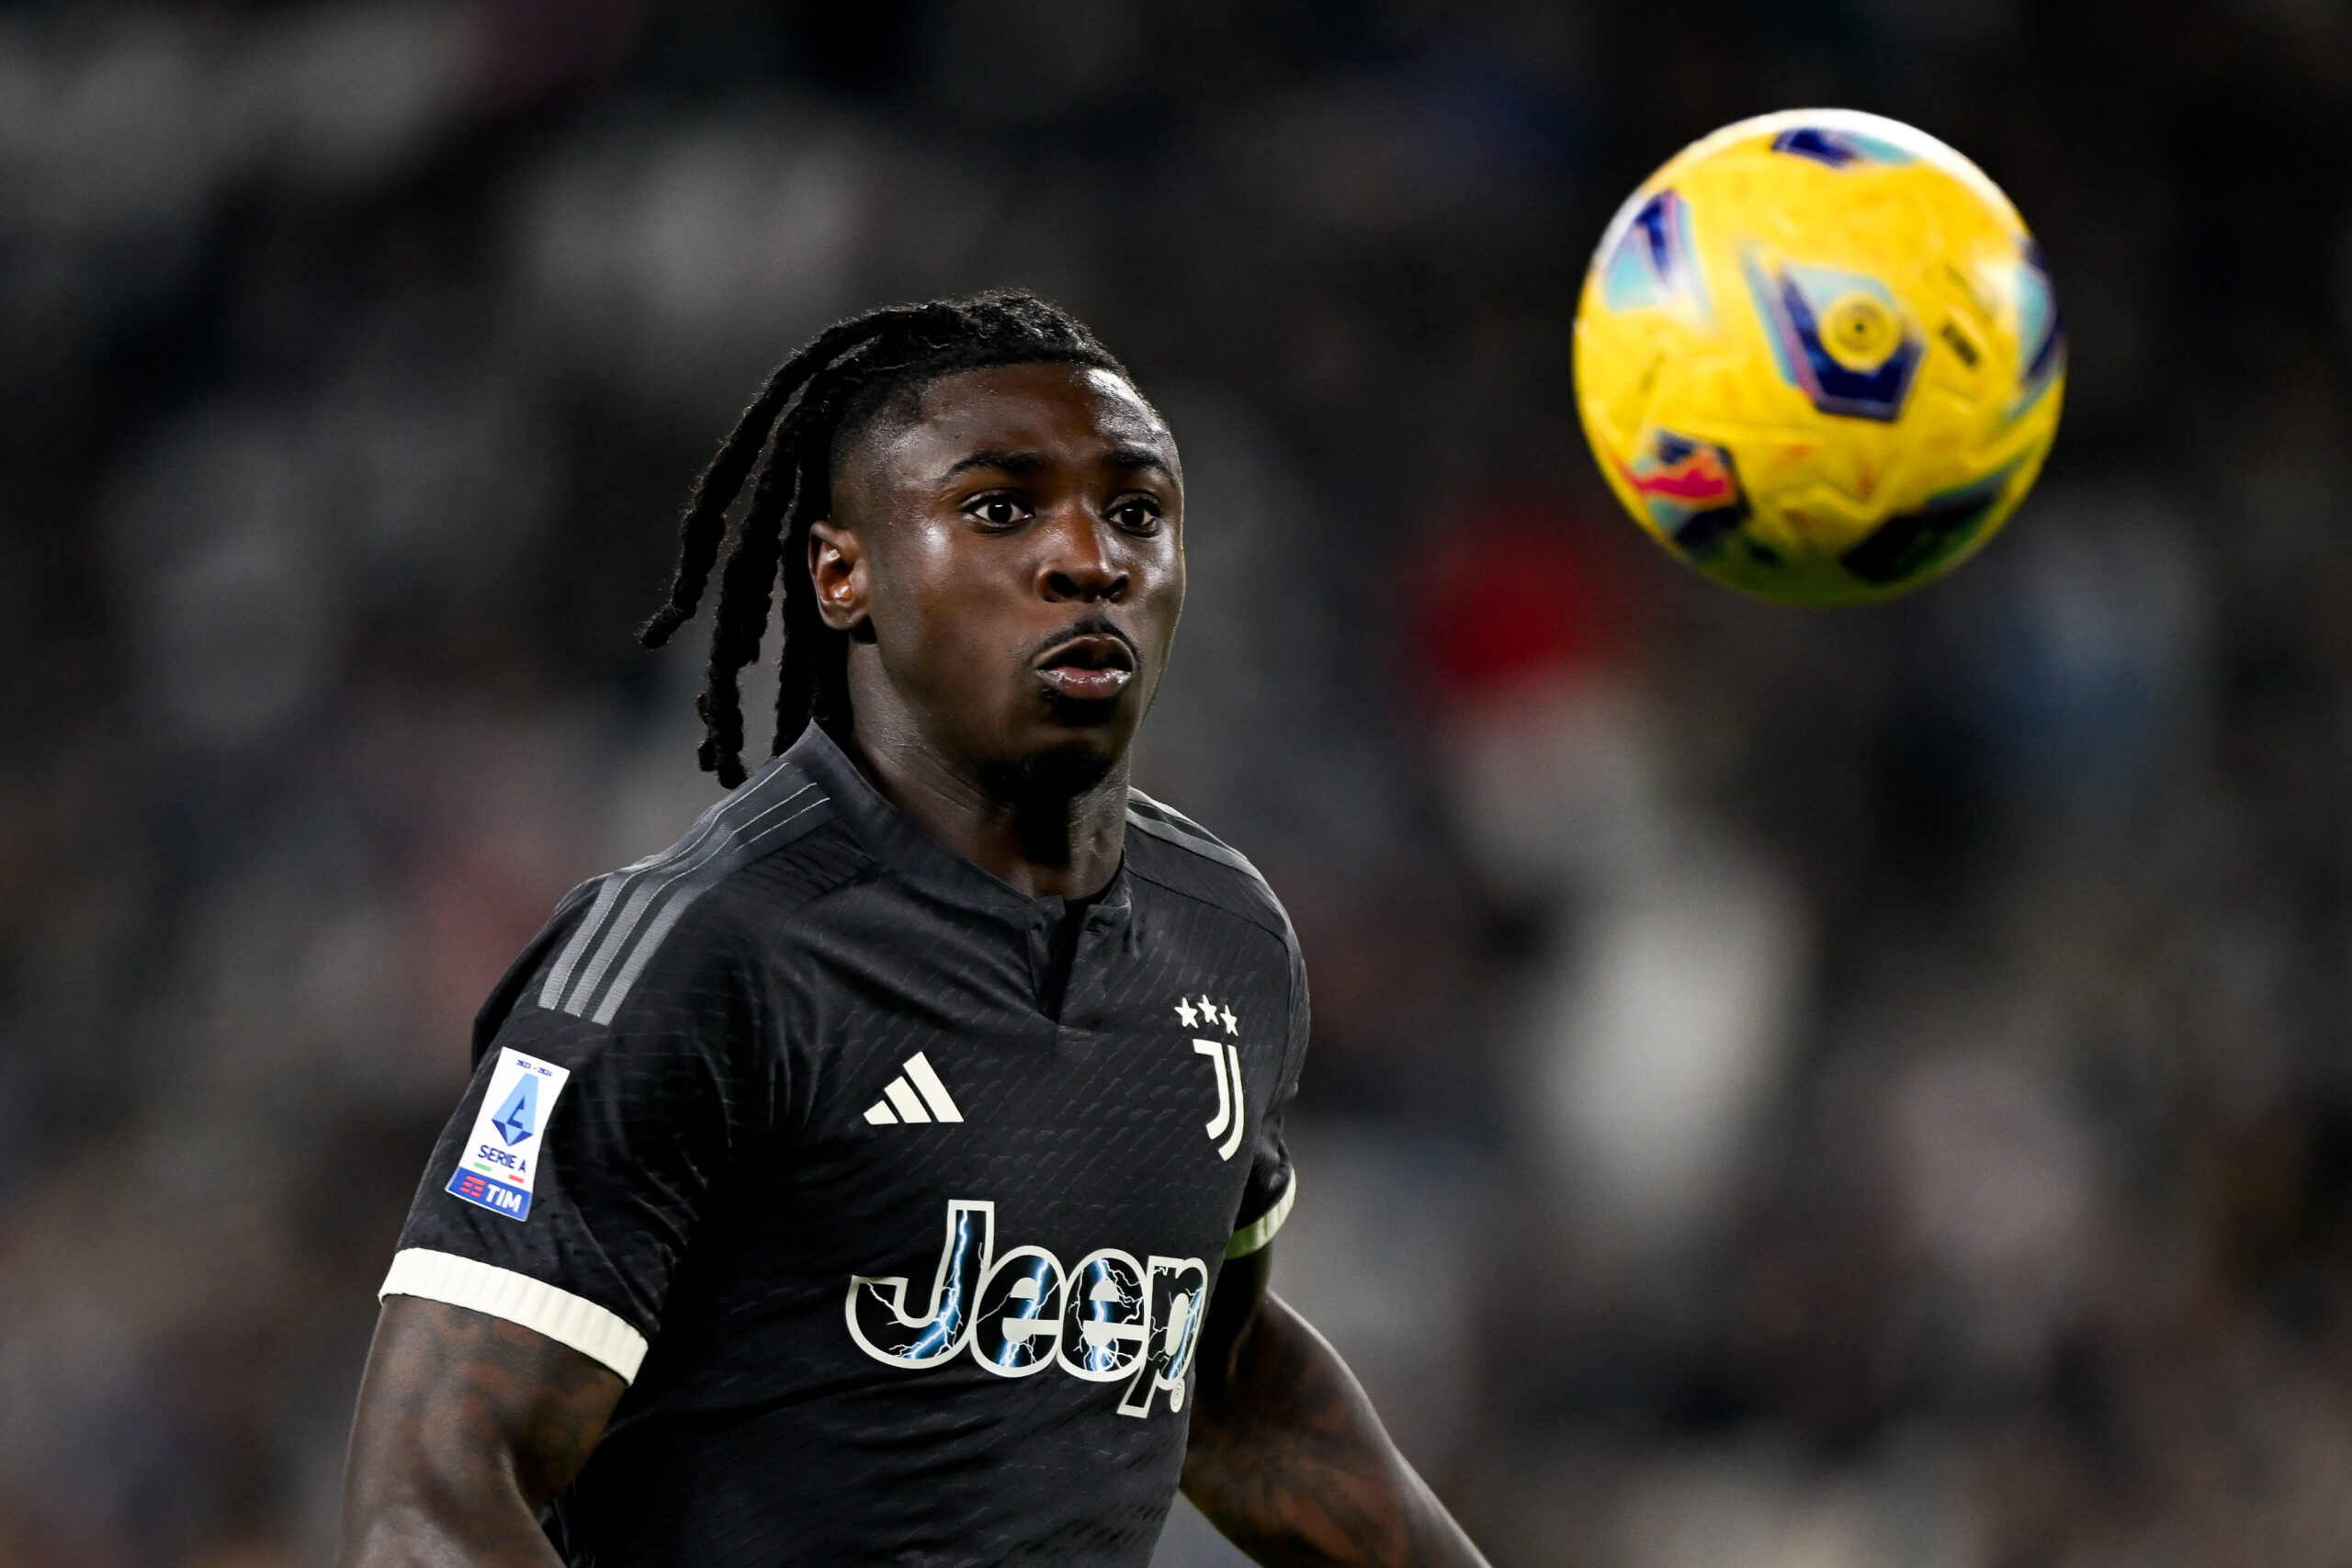 Moise Kean could leave Juventus in January, but he’s waiting for the right opportunity. He has been touted to depart on loan after extending his contract.